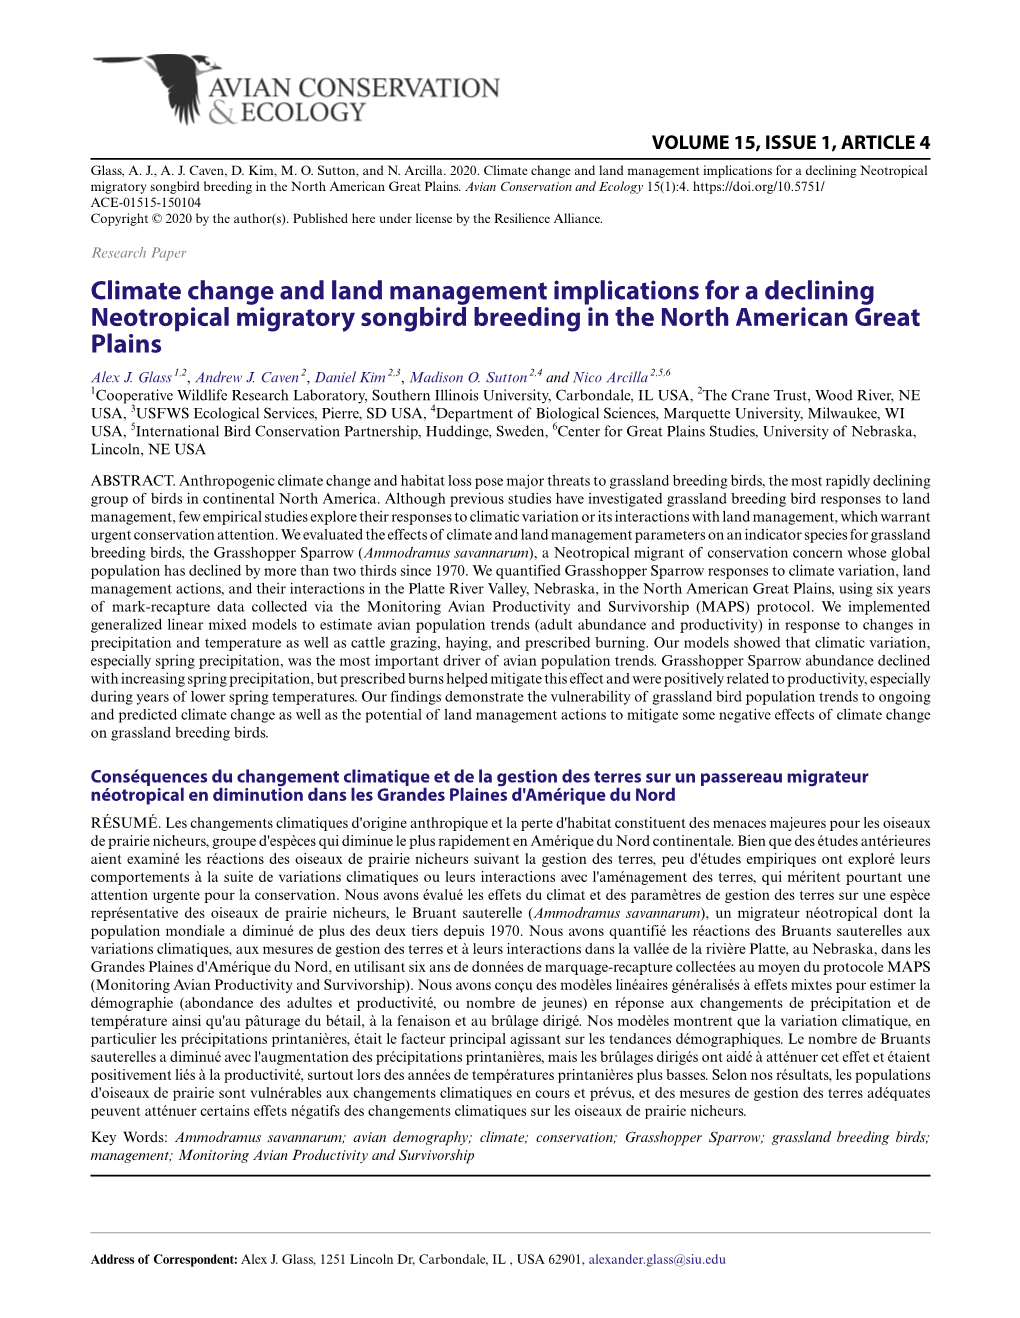 Climate Change and Land Management Implications for a Declining Neotropical Migratory Songbird Breeding in the North American Great Plains